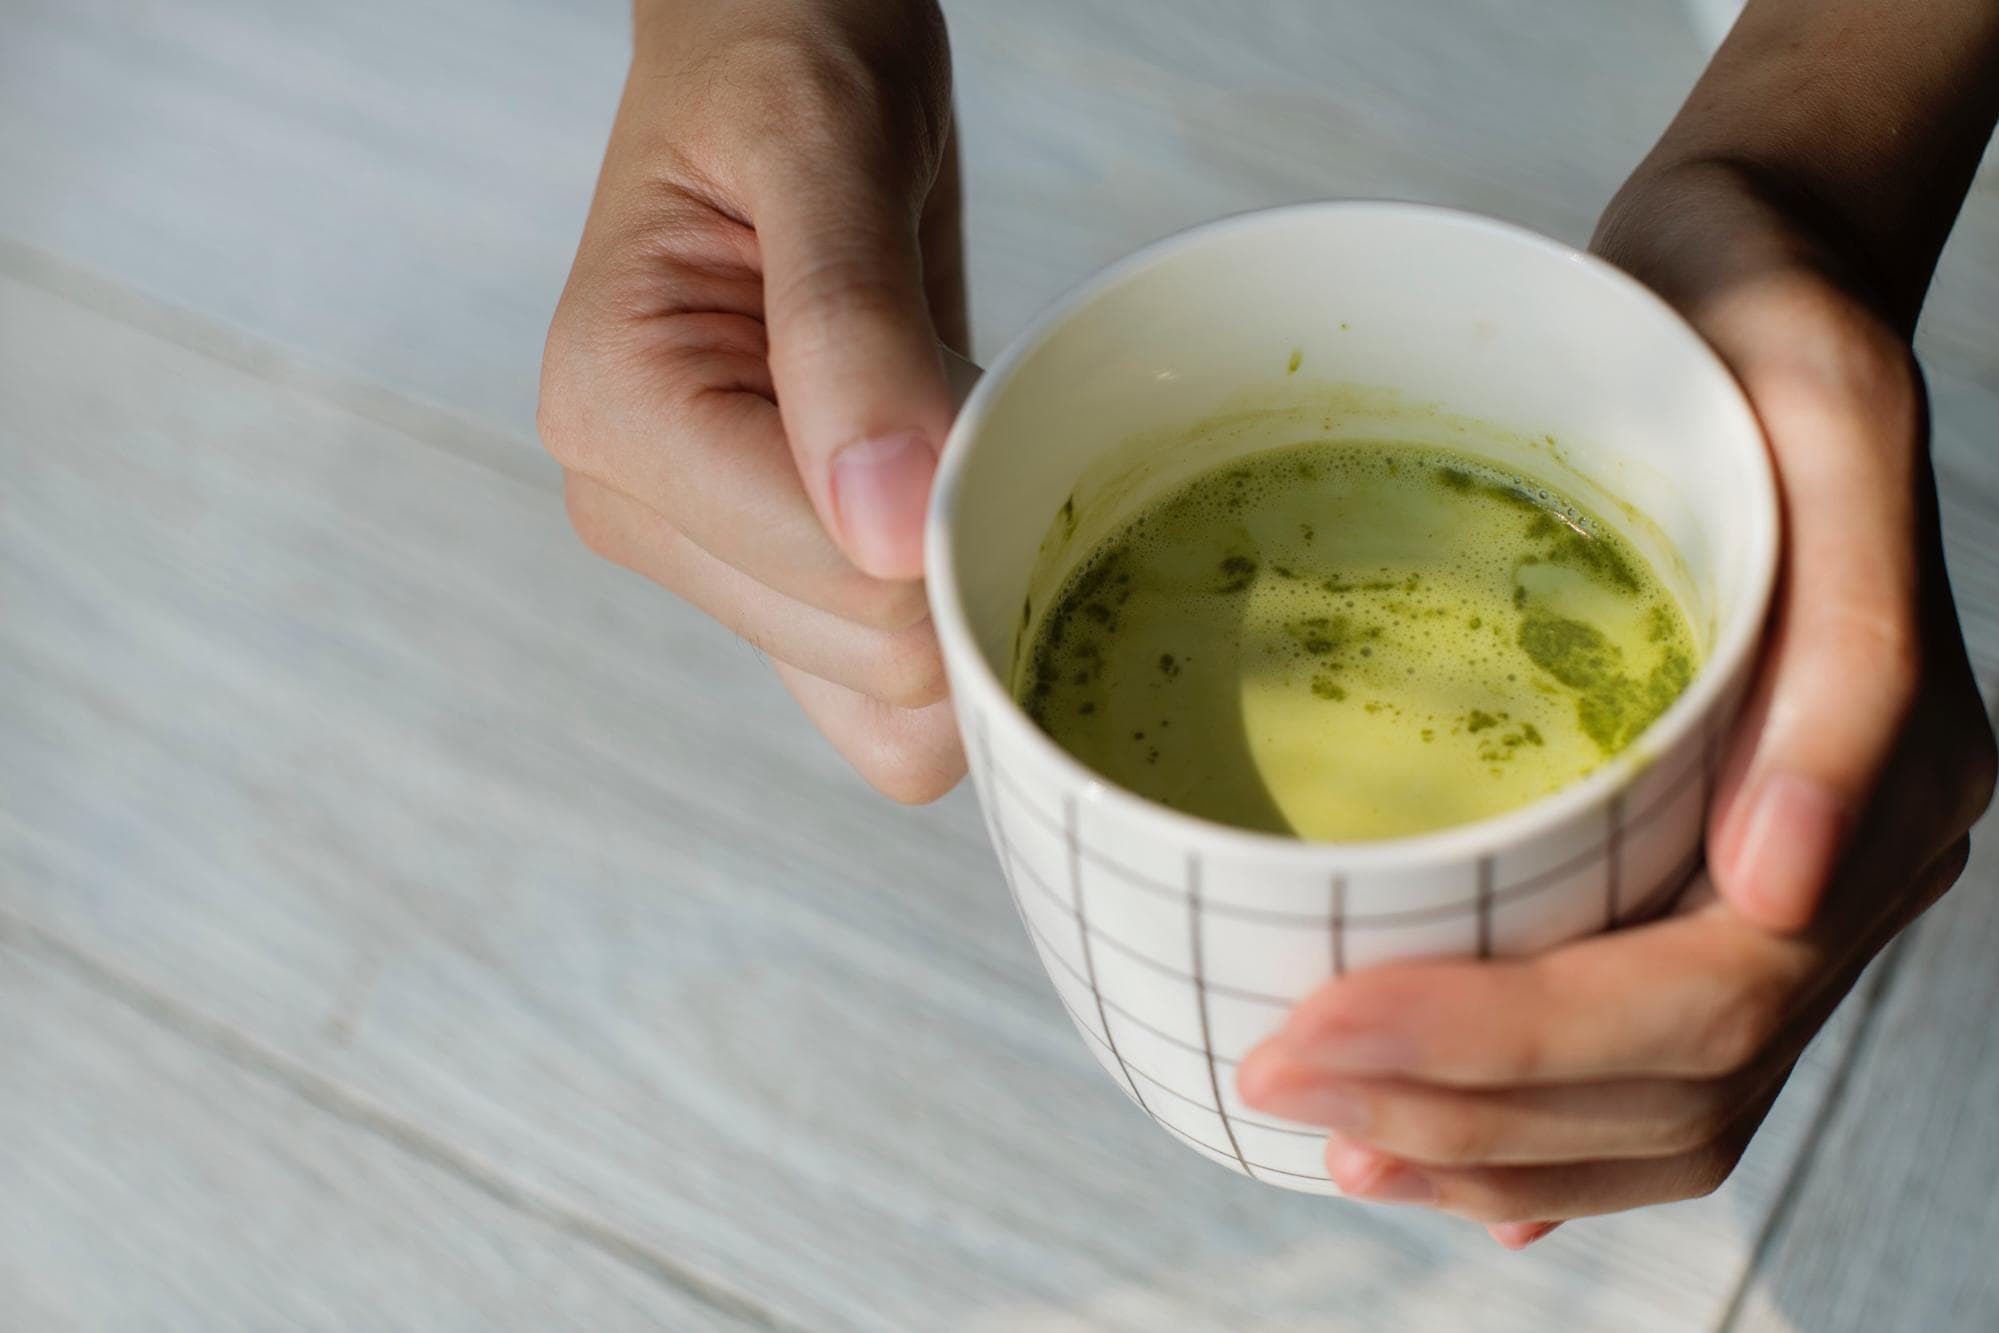 This primer will shed some light on the topic of green tea caffeine